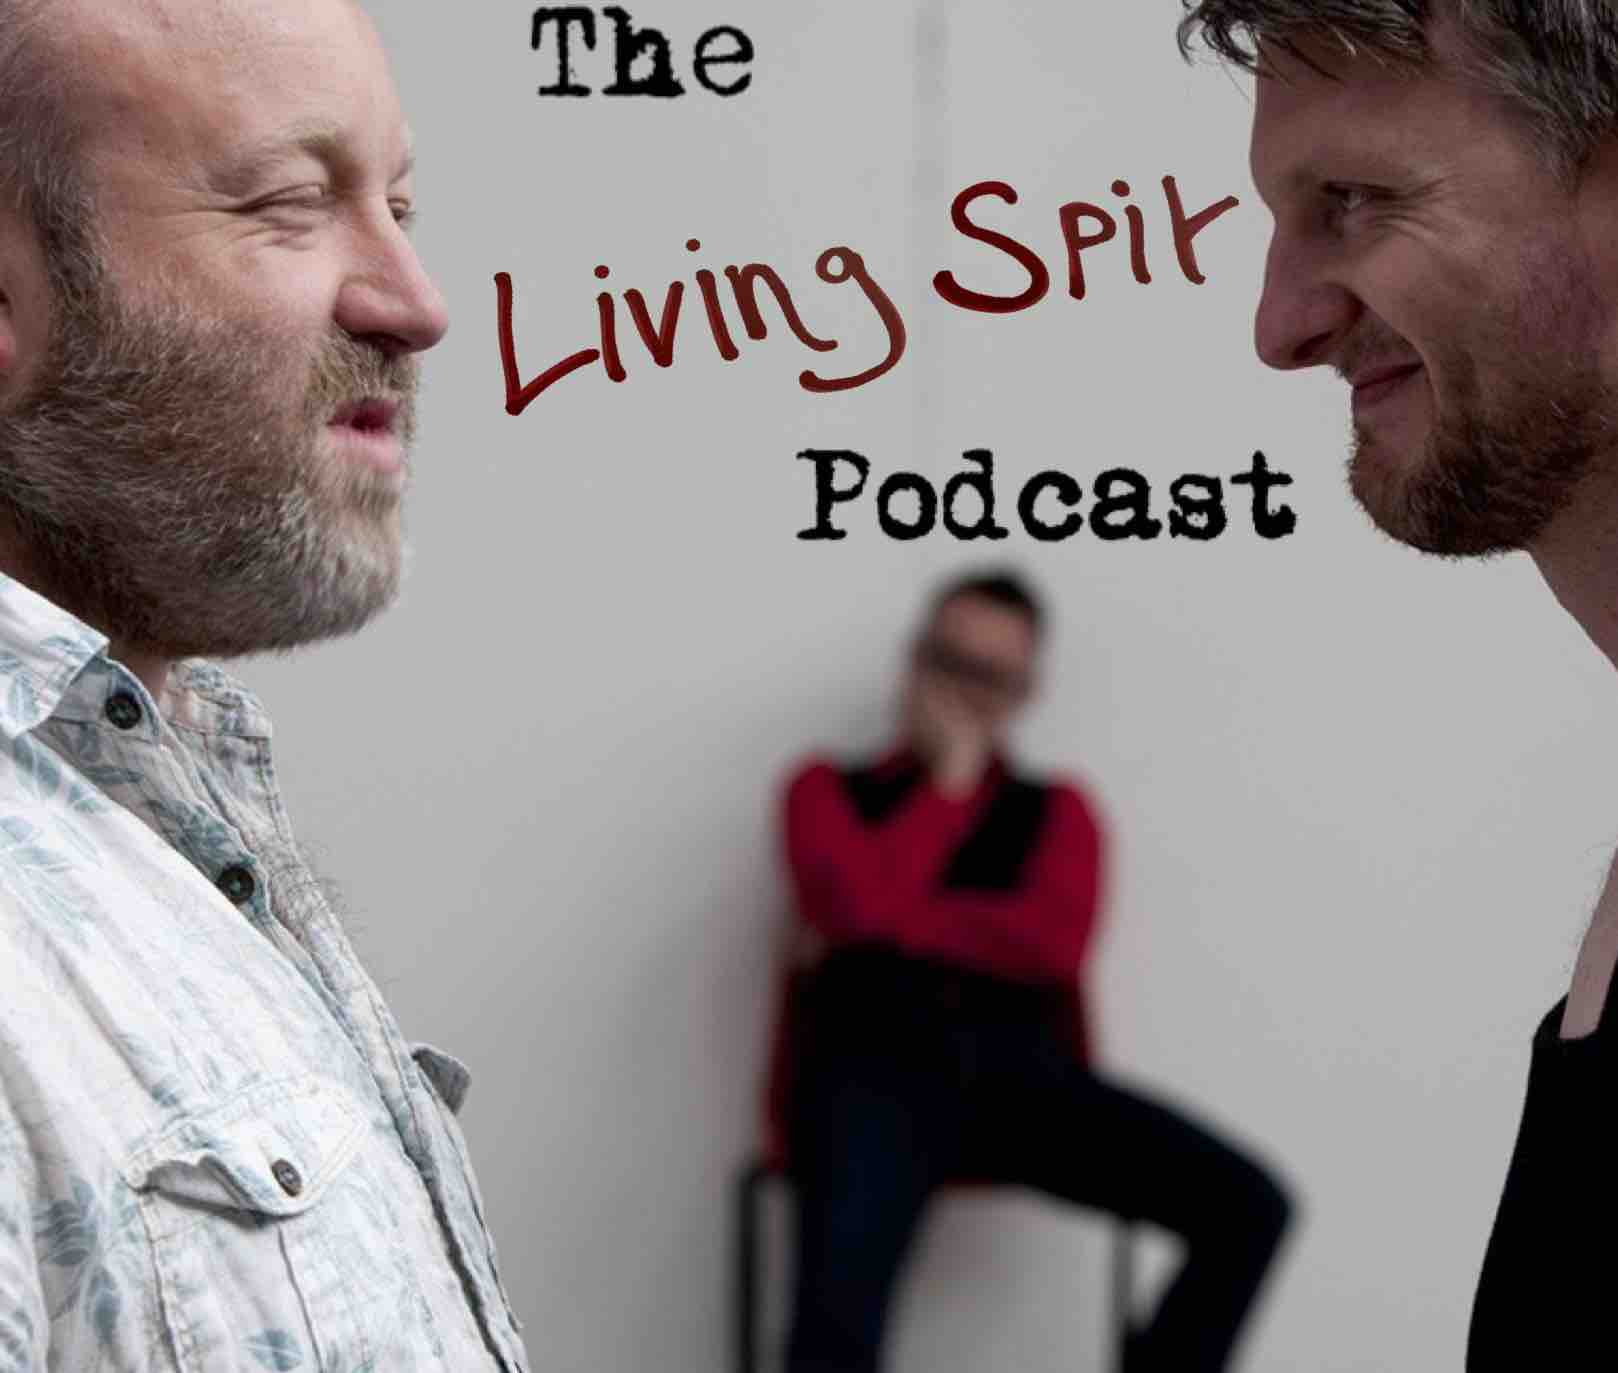 The Living Spit Podcast